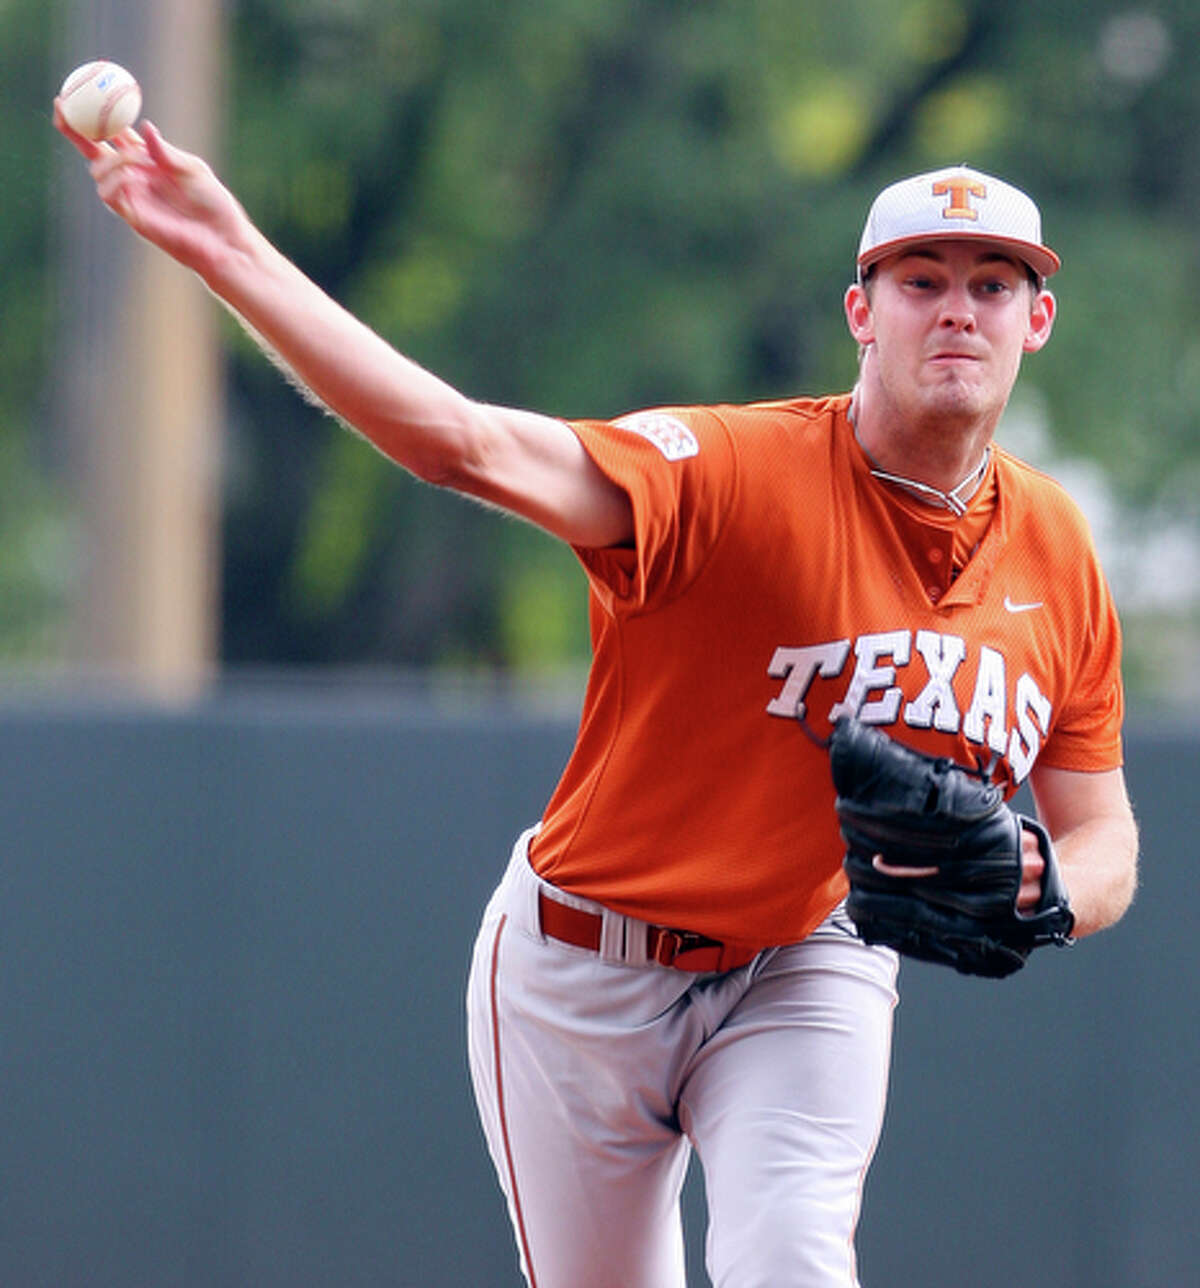 Texas' Taylor Jungmann pitches against TCU during game 2 of the NCAA 2010 Super Regionals held Saturday June 12, 2010 at UFCU Disch-Falk Field in Austin, Tx. Texas won 14-1.